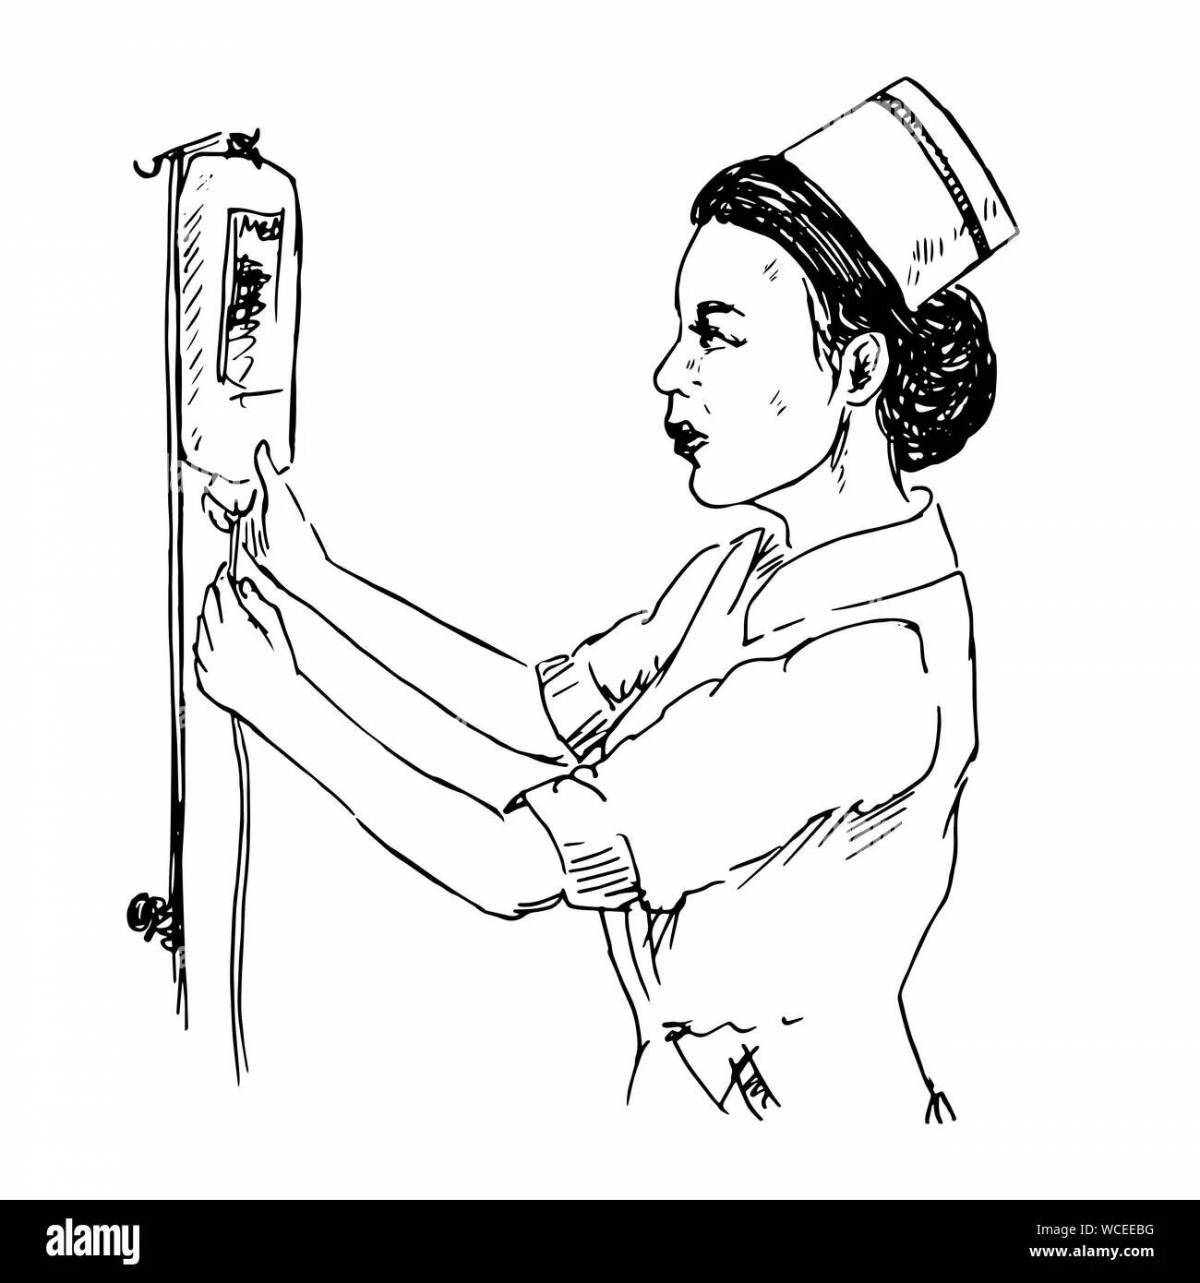 Exquisite military nurse coloring page